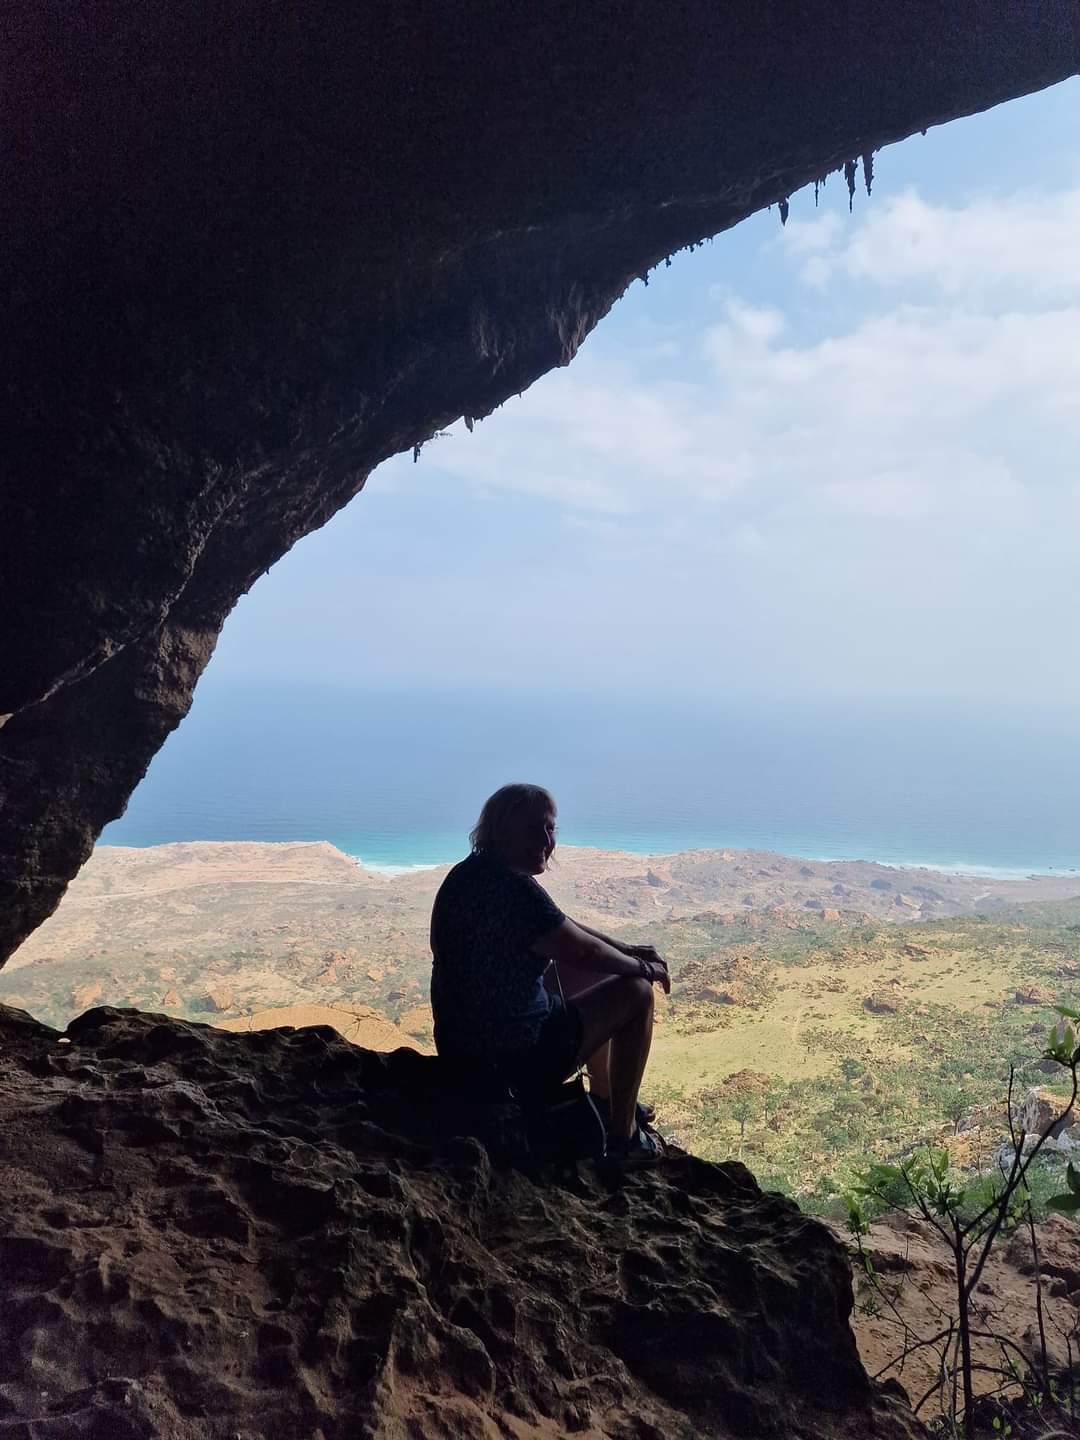 Me looking at the view from Hoq cave Socotra